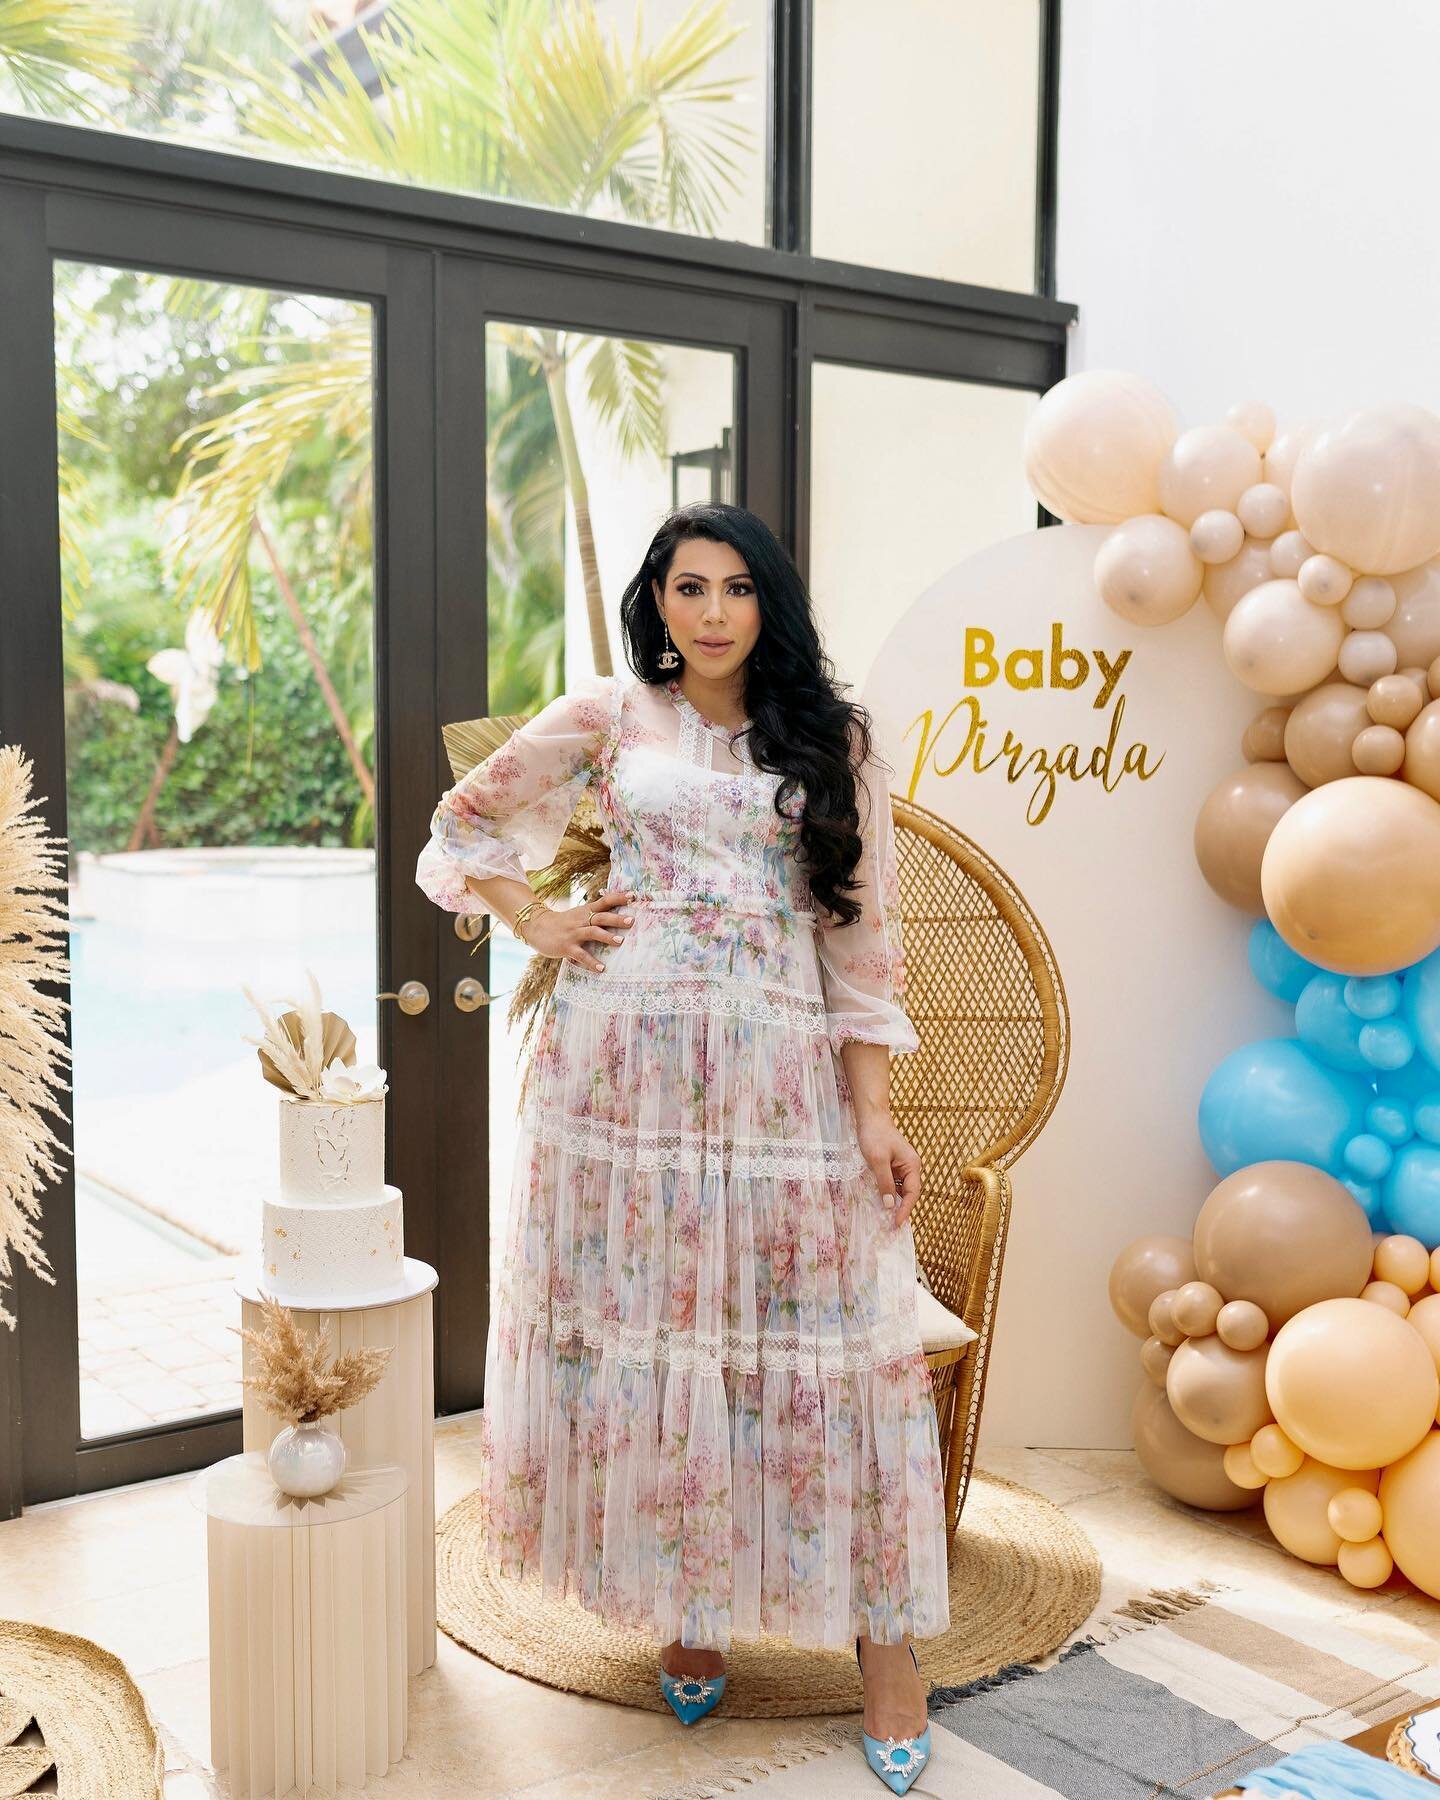 Absolutely loved the details of this intimate Boho Baby Shower. Congrats to our stunning Mama to be! 🥰🤍 @kenzawenza 
-
Planning + Design: @tinywondersevents 
Backdrop + Chair Rental: @tinywondersevents 
📸: @emmacastcreative 
🎈 : @petalosas 
🎂 : 